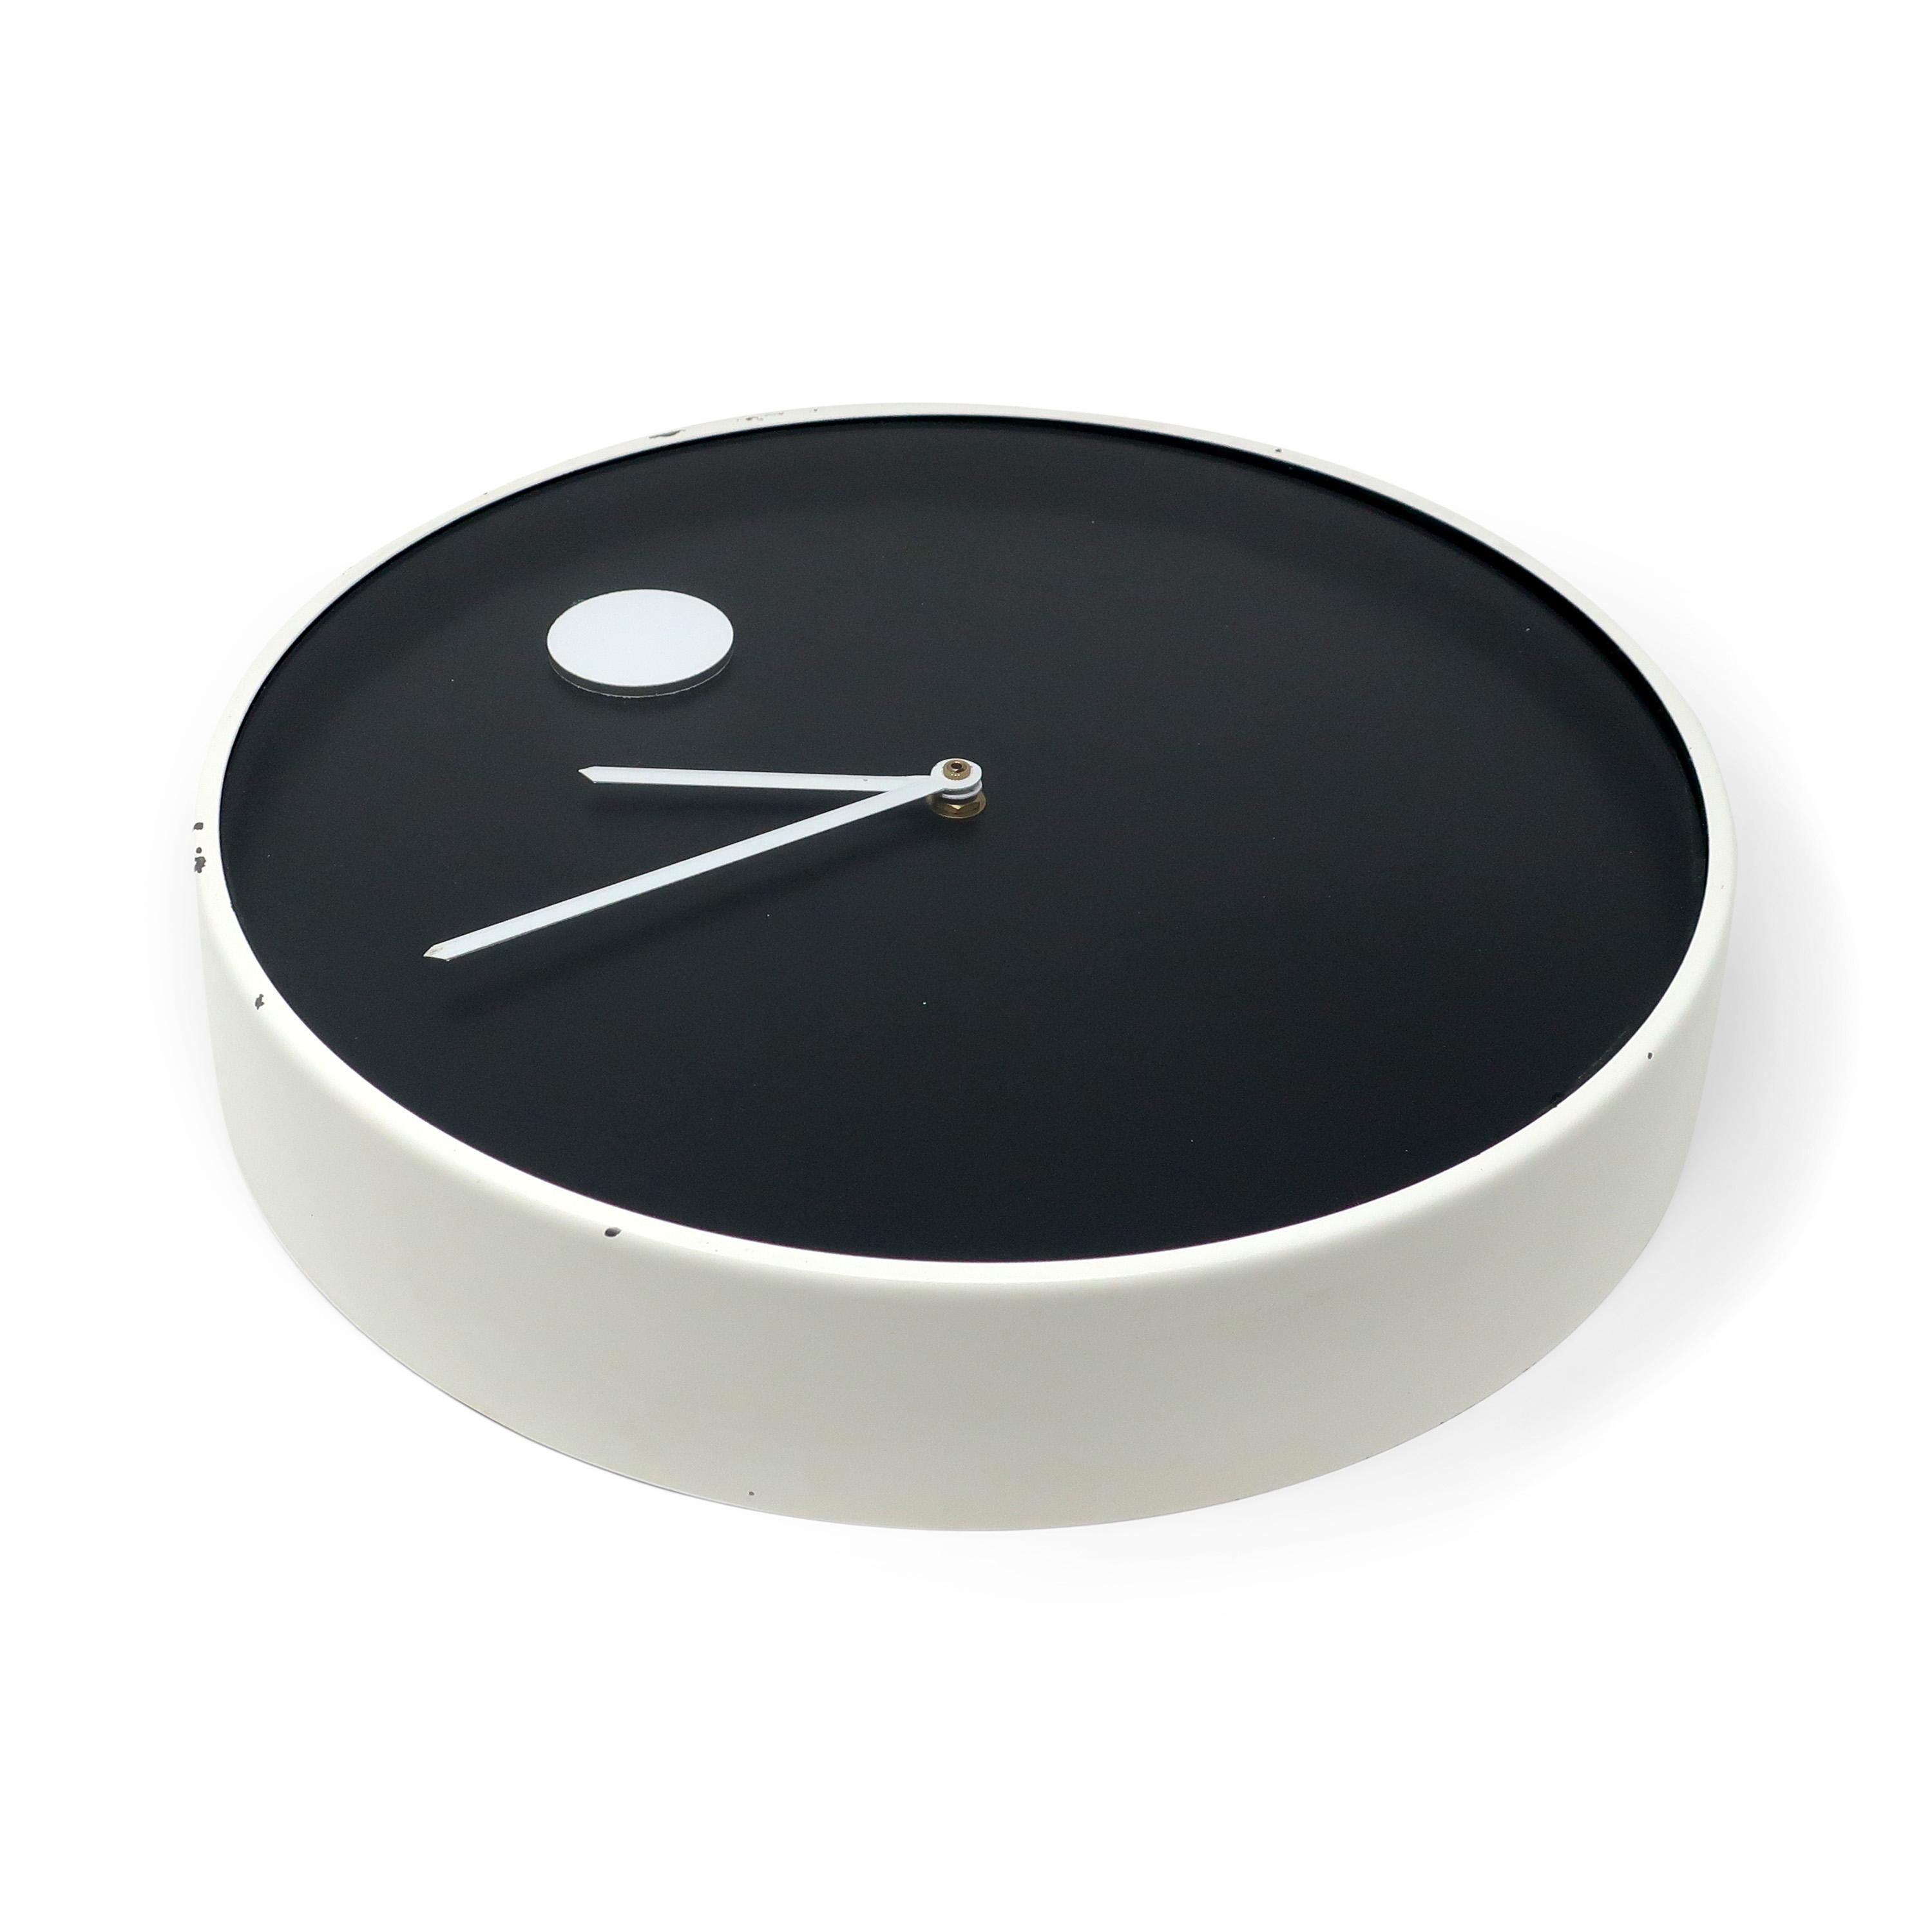 A minimalist black and white wall clock designed by Nathan George Horwitt for Howard Miller. Metal white enameled case, white hands, black face, white dot at the 12 o’clock position. and glass front. Included in the 1970's design collection of the